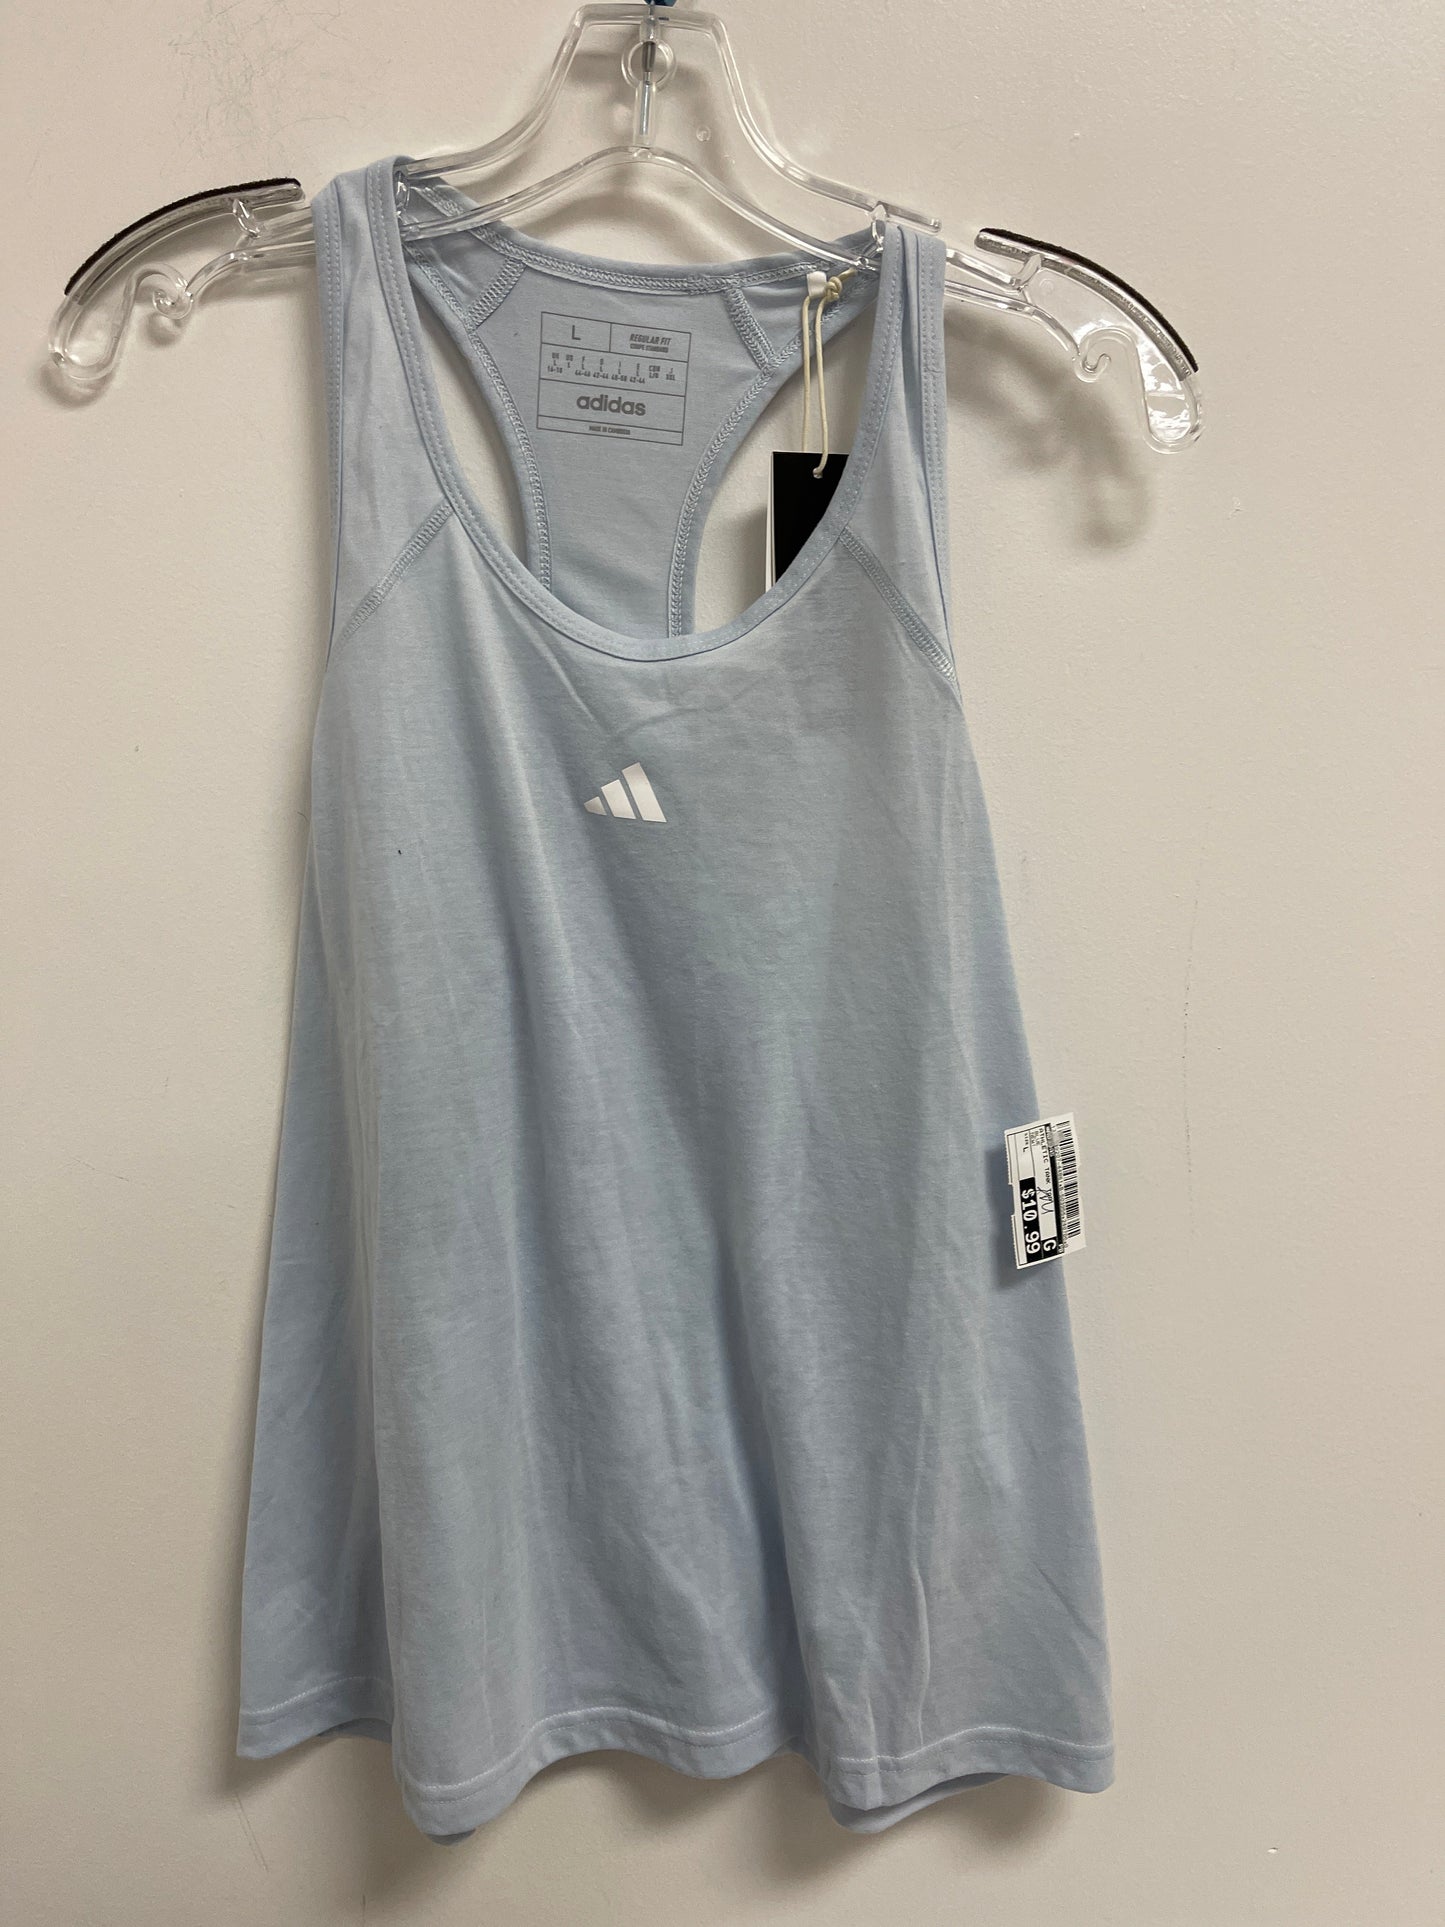 Blue Athletic Tank Top Adidas, Size L